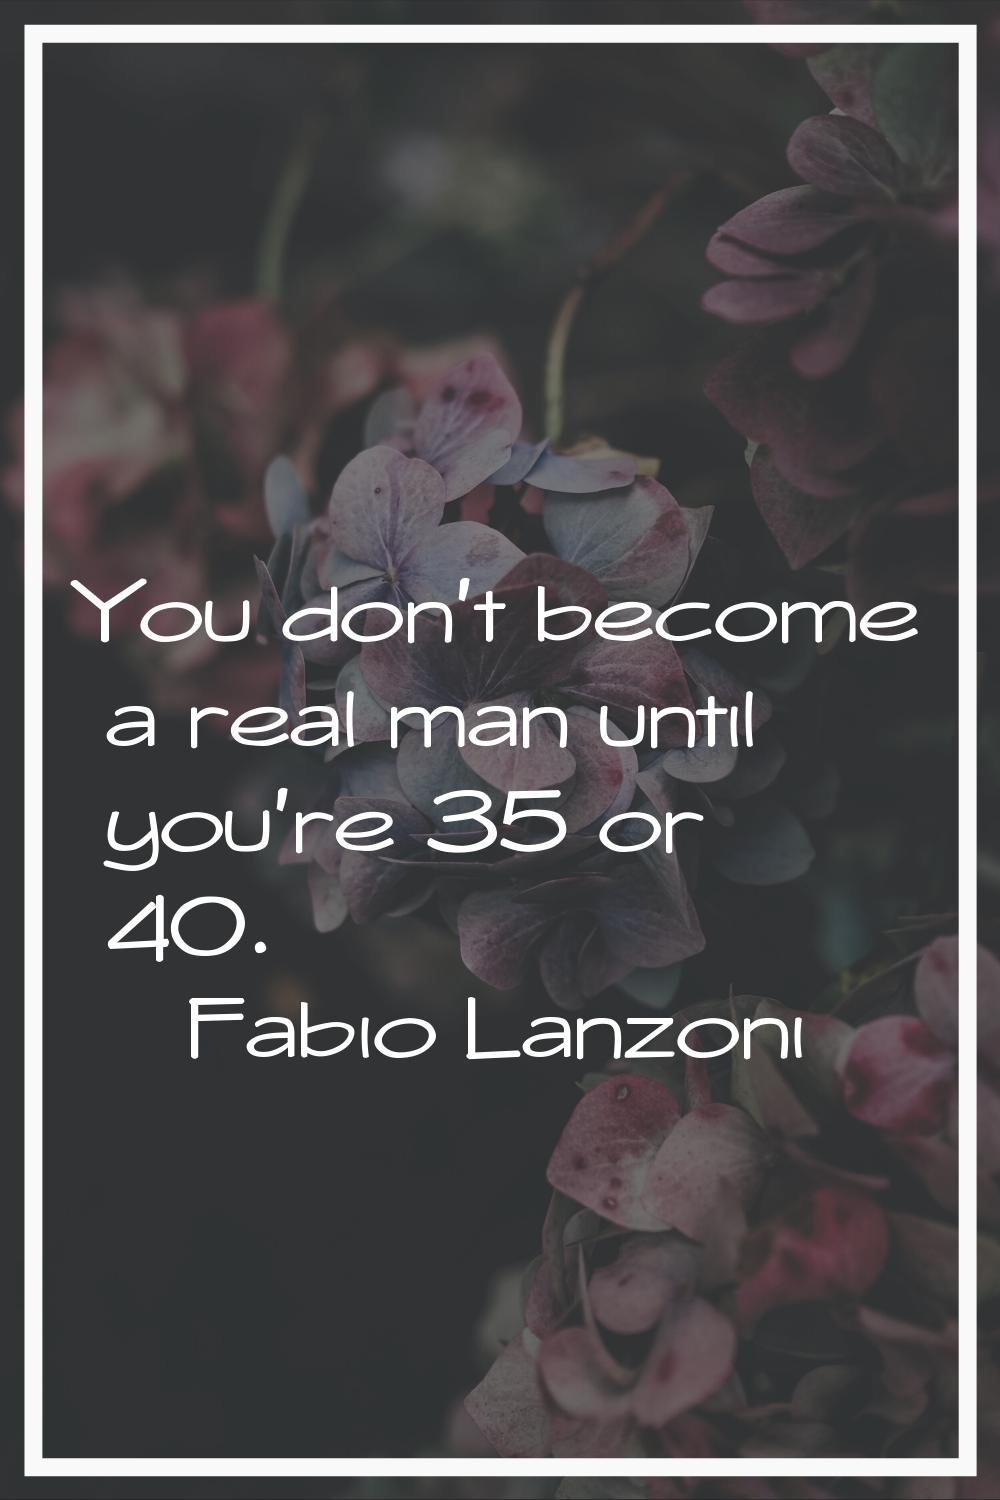 You don't become a real man until you're 35 or 40.